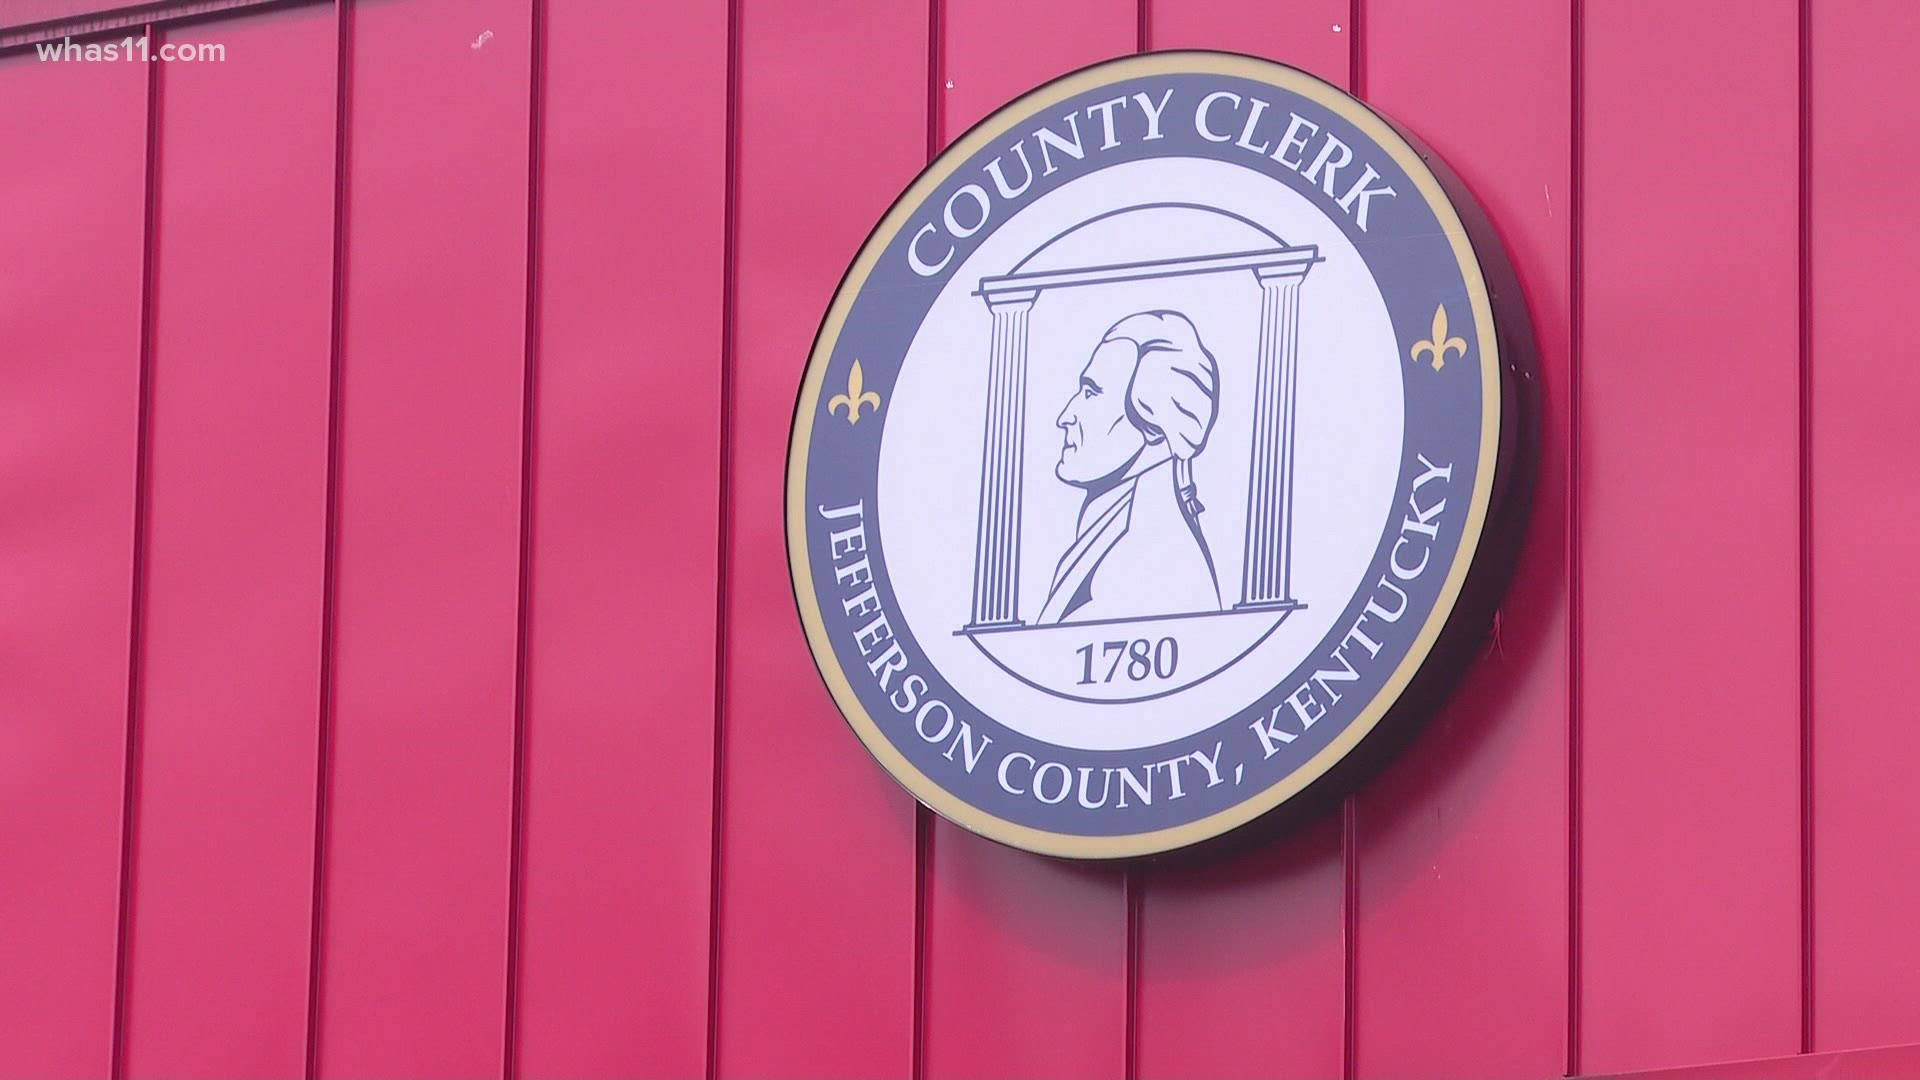 Jefferson County Clerk Bobbie Holsclaw said a typical renewal should take five minutes, but with the delays, it takes 20 to 30 minutes to make one transaction.